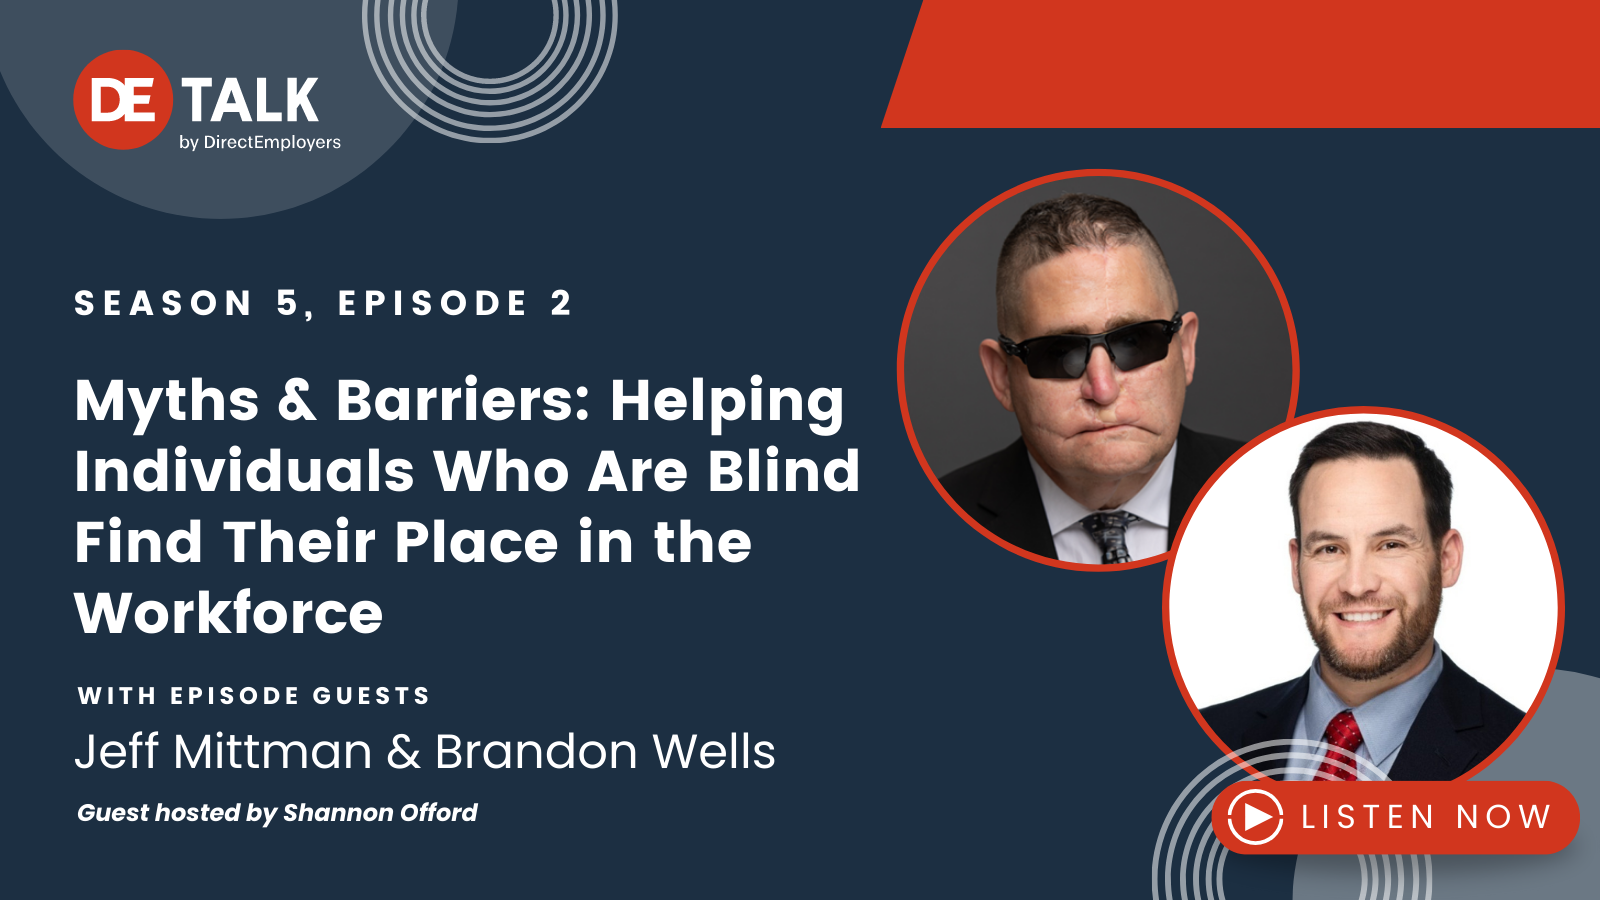 DE Talk Season 5 Episode 2 — Myths & Barriers: Helping Individuals Who Are Blind Find Their Place in the Workforce